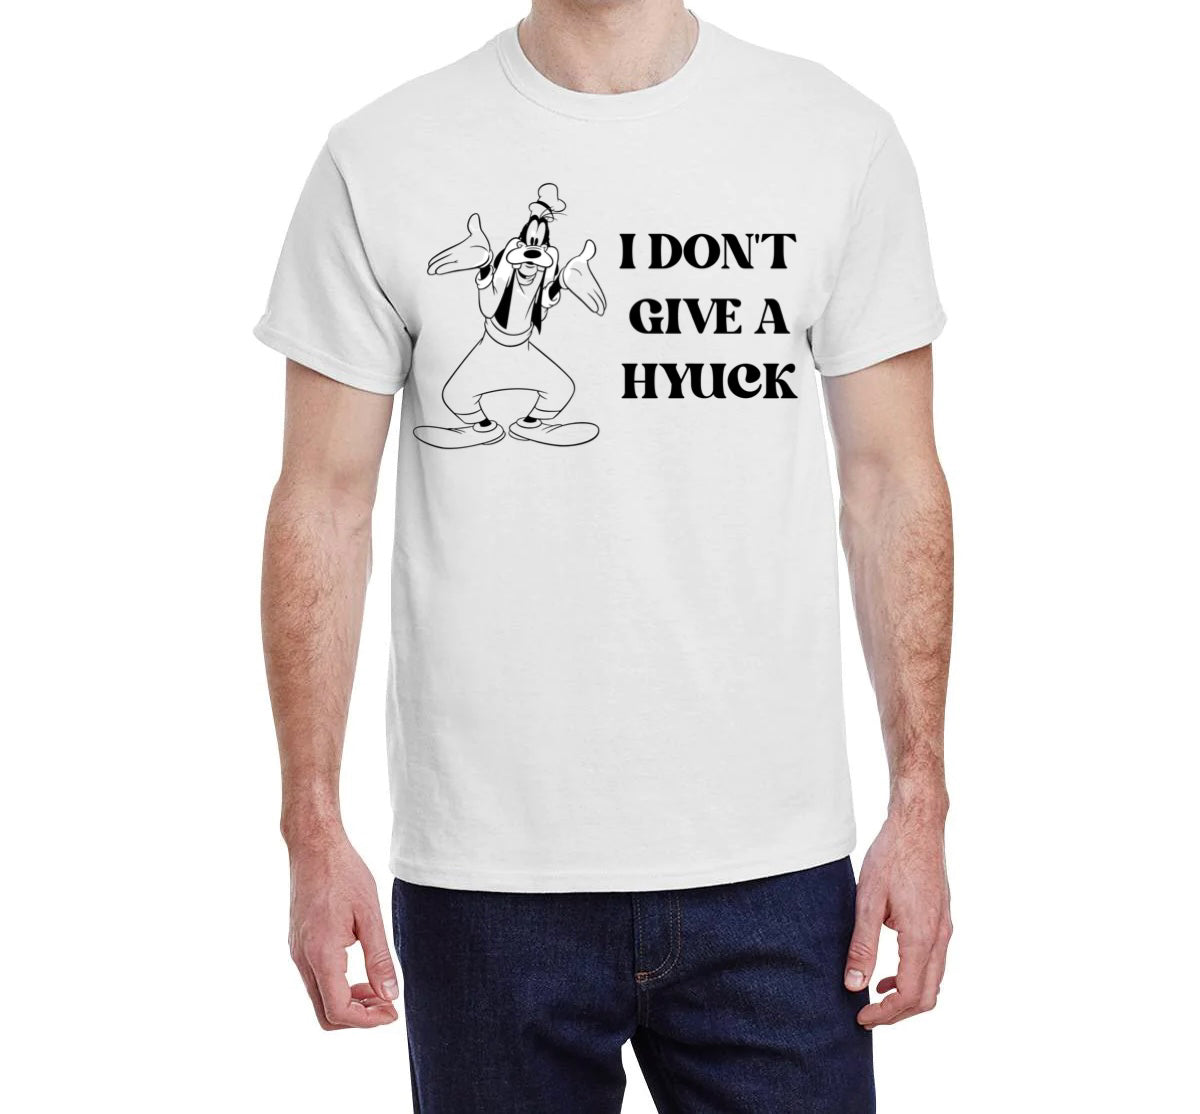 I Don’t Give a Hyuck